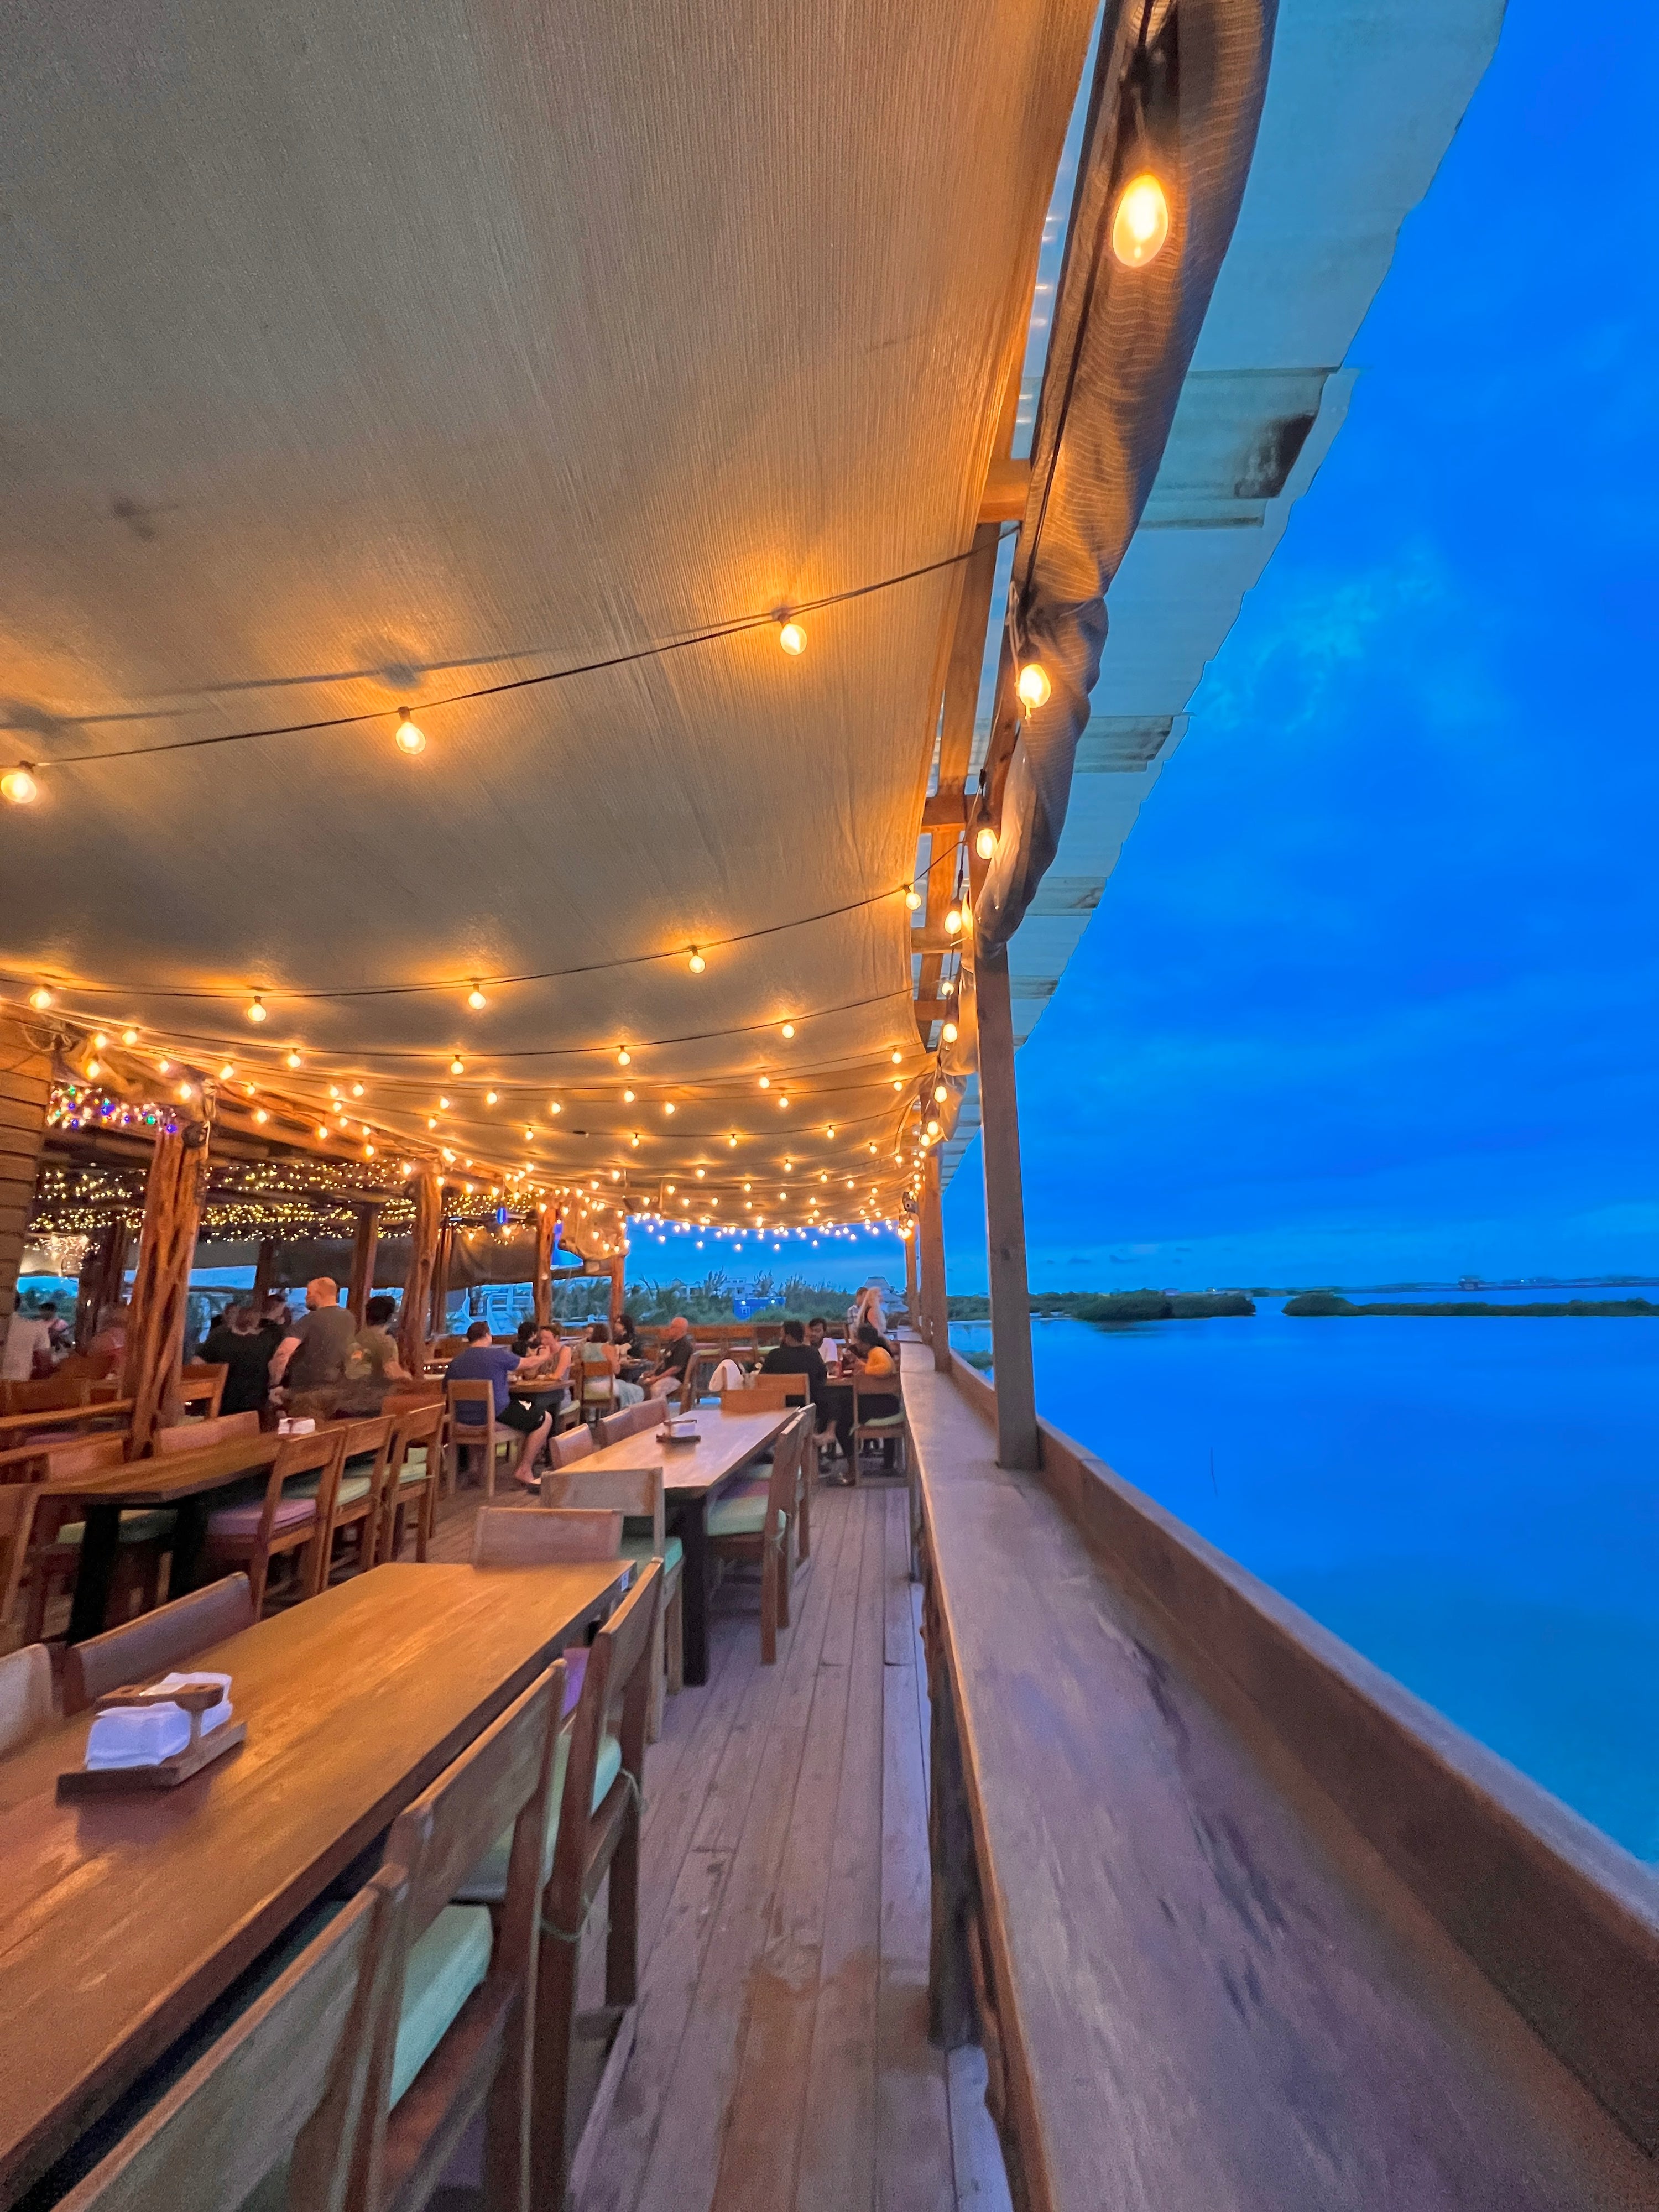 Let us take you to the Best restaurant that has the best sunset view in ambergris Caye.